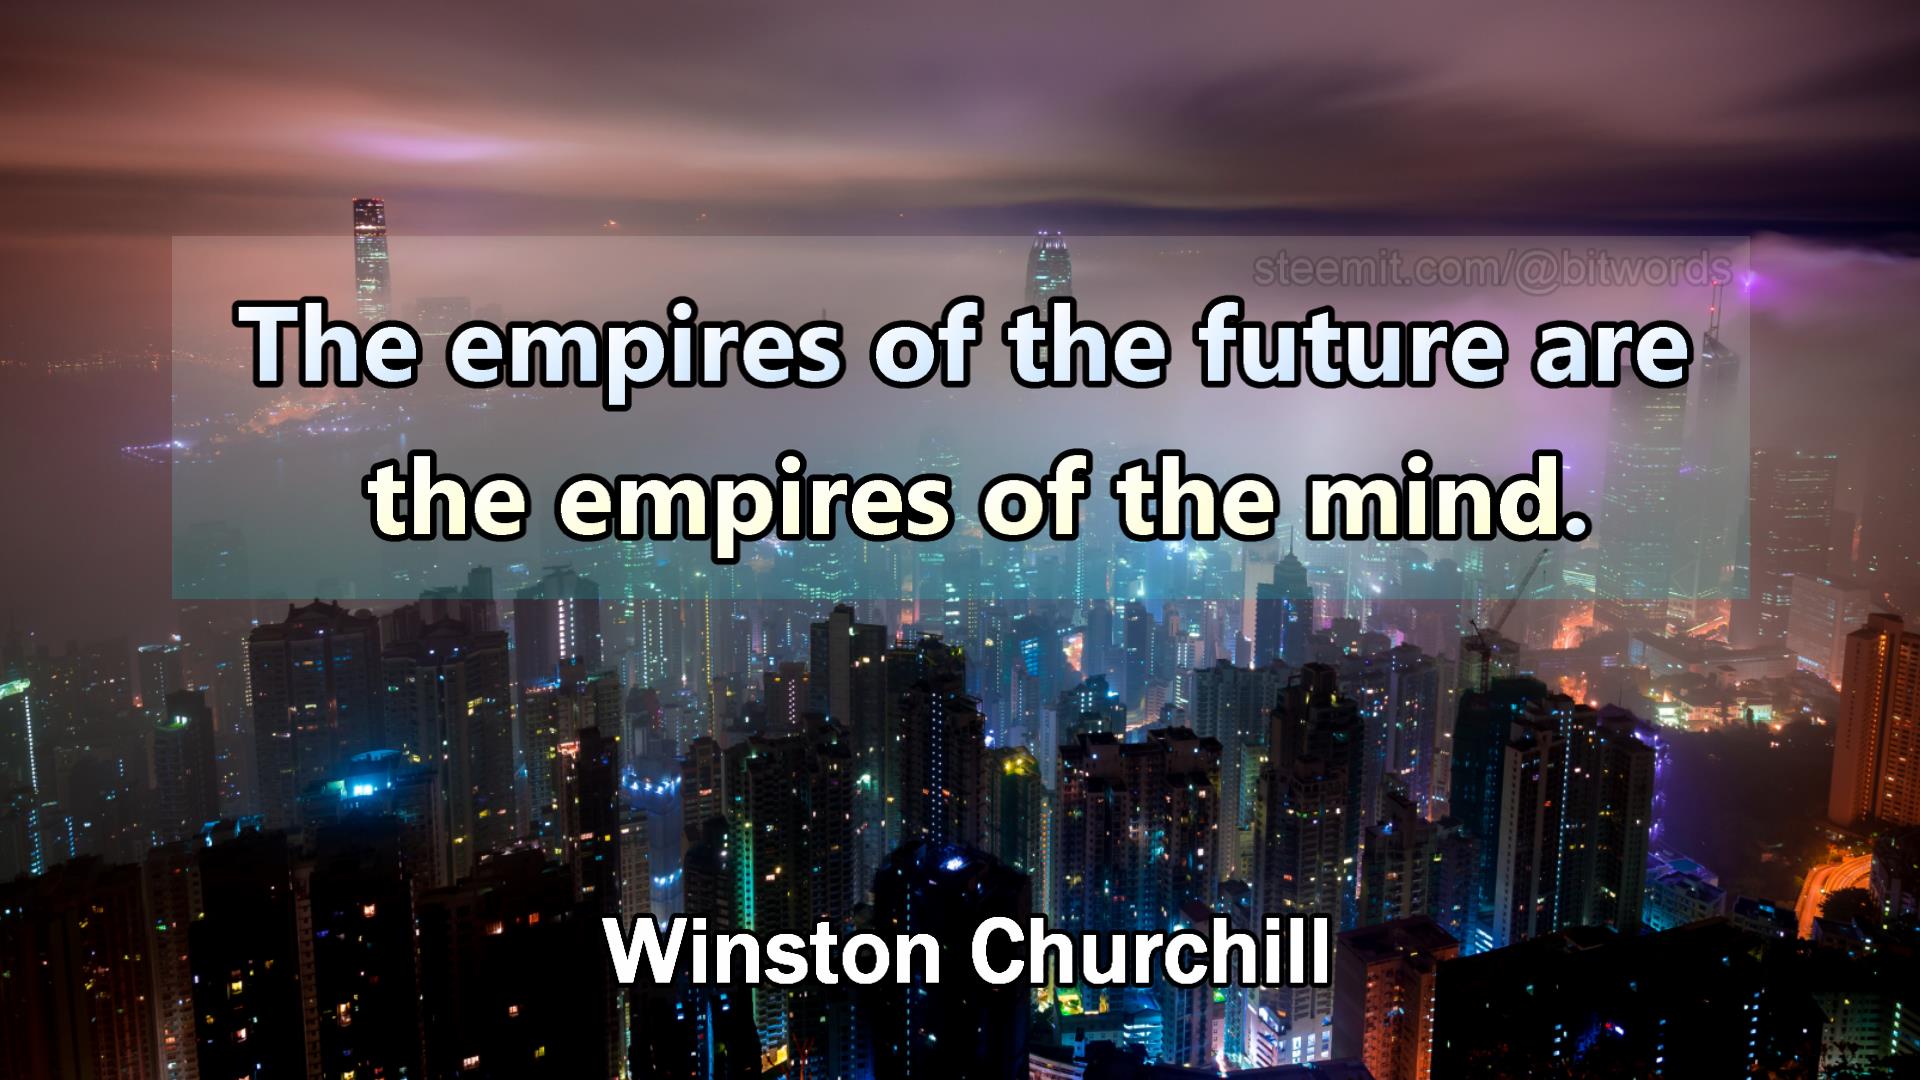 bitwords quotes inspirational by winston churchill (3).jpg